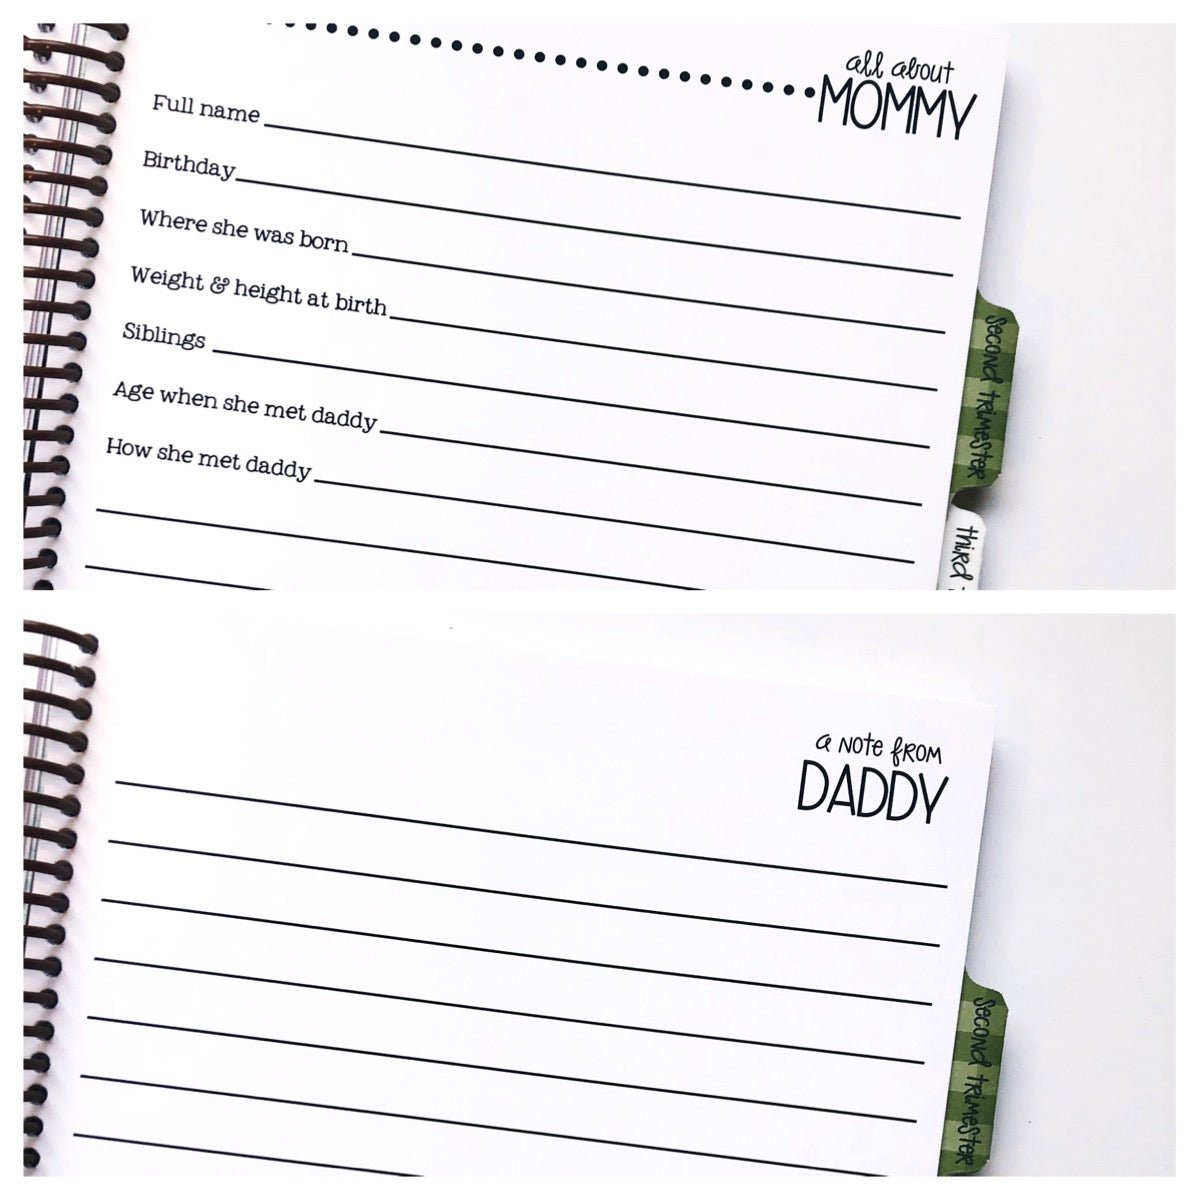 Pregnancy journal comes in single mom and two mom versions as well as traditional mommy and daddy version.